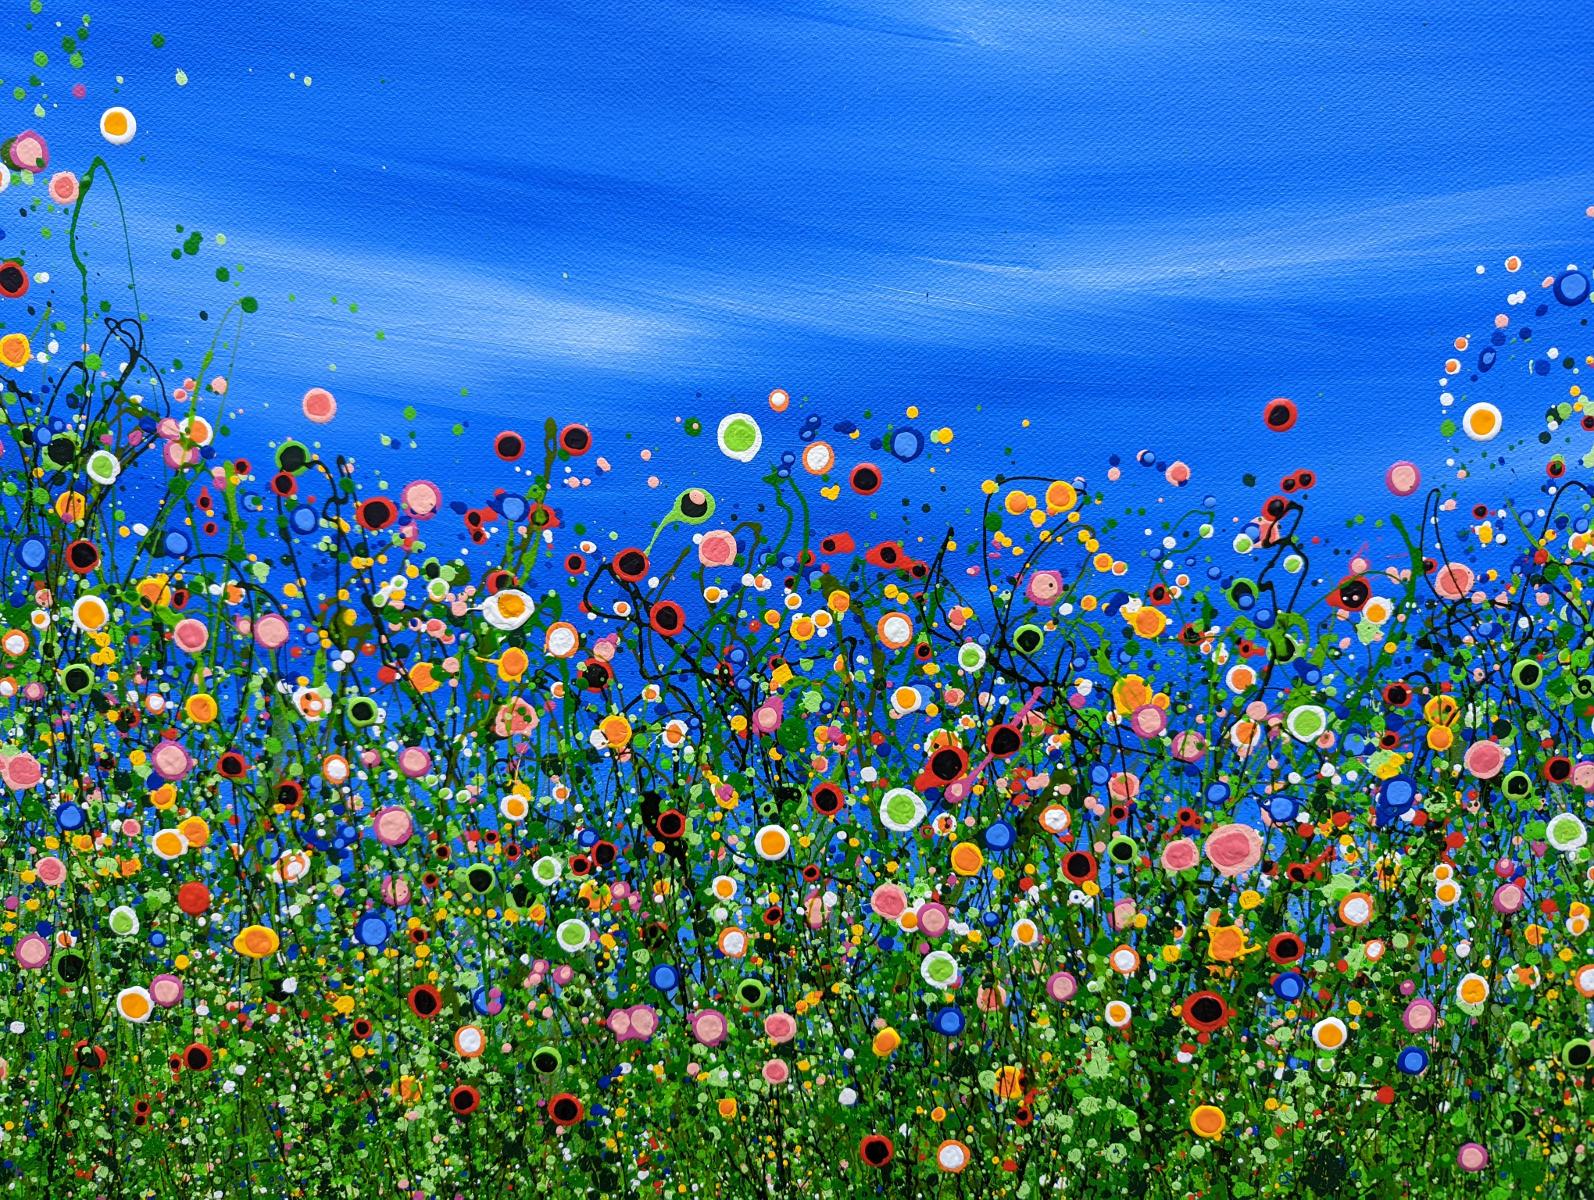 Lucy Moore  Landscape Painting - Summer Pop Meadow #3 by Lucy Moore, Meadows, Floral, Wildflowers, Painting 